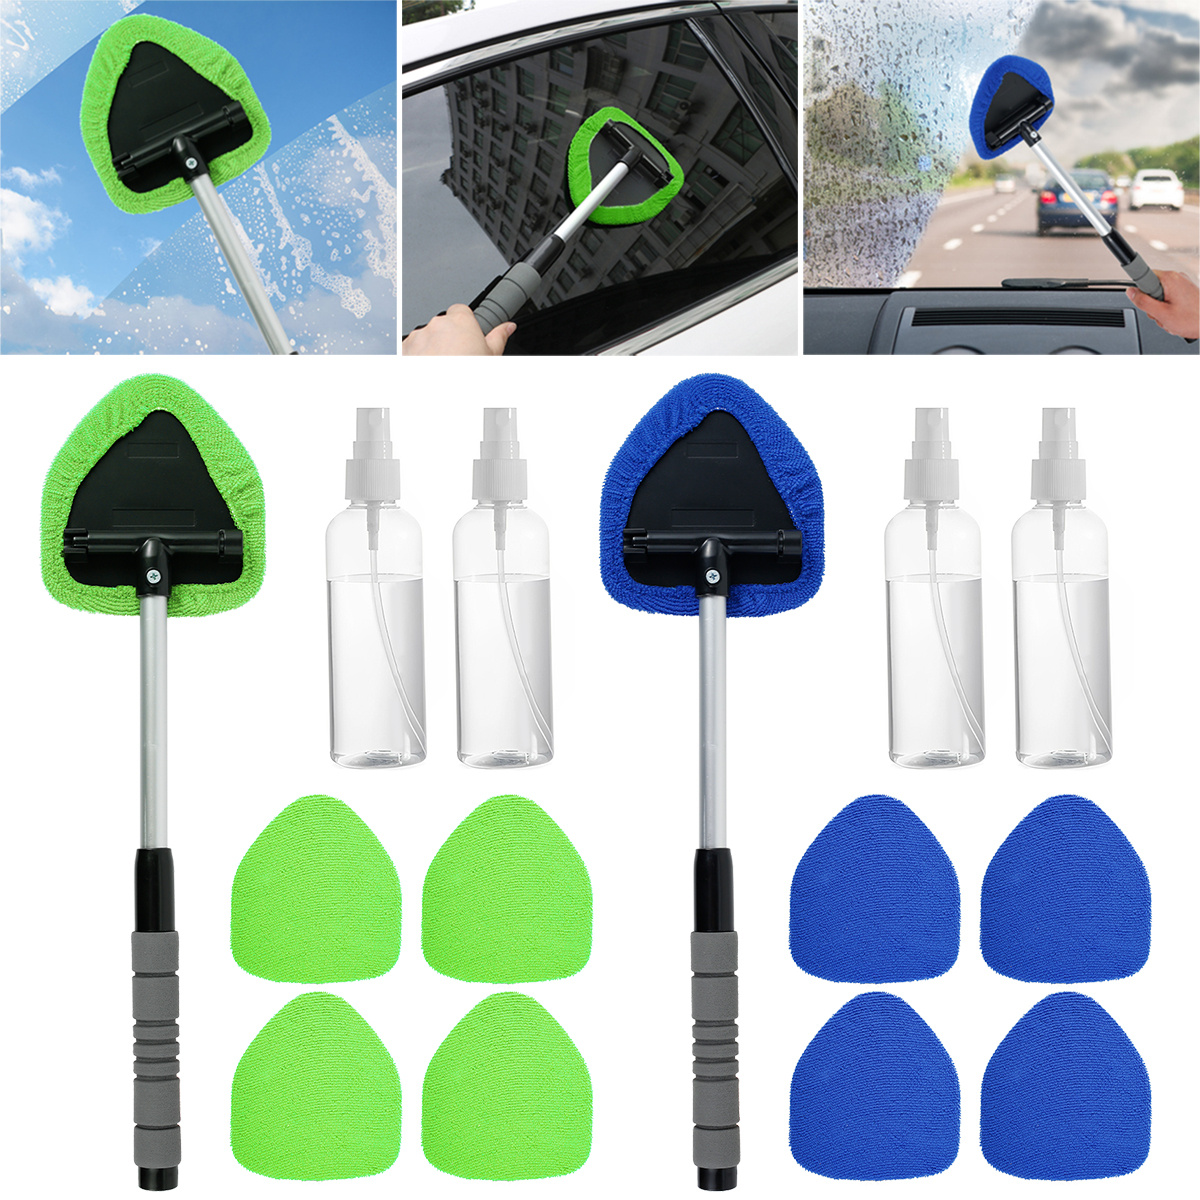 2pcs Car Window Cleaner Brush Kit Windshield Cleaning Wash Tool Inside  Interior Auto Glass Wiper With Long Handle Car Accessories Best Seller Gift